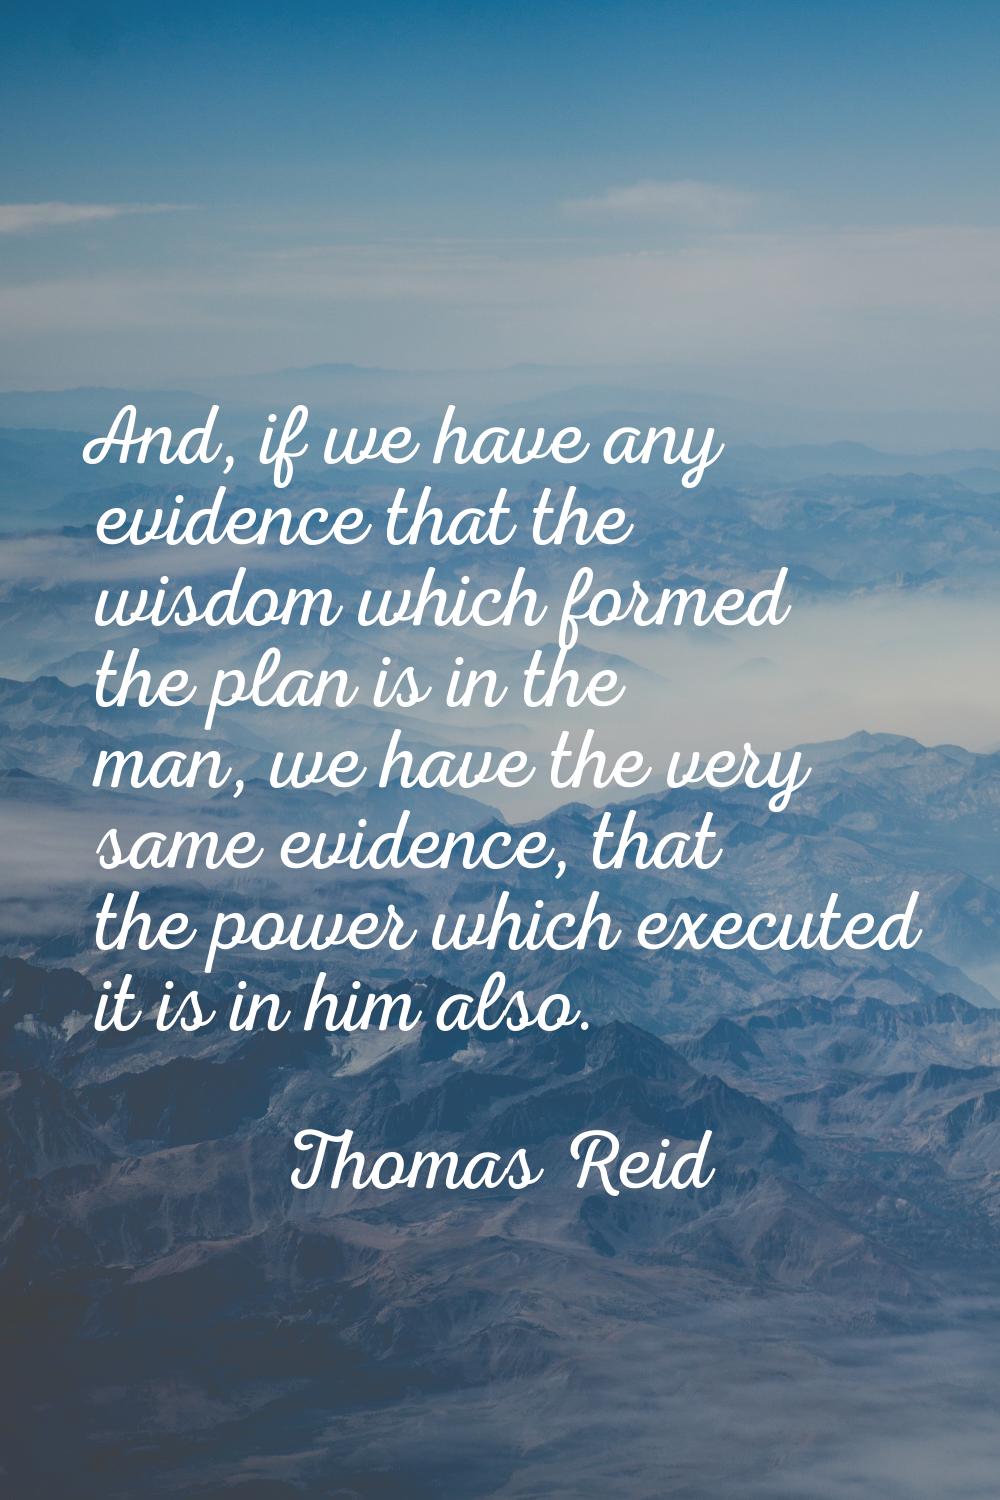 And, if we have any evidence that the wisdom which formed the plan is in the man, we have the very 